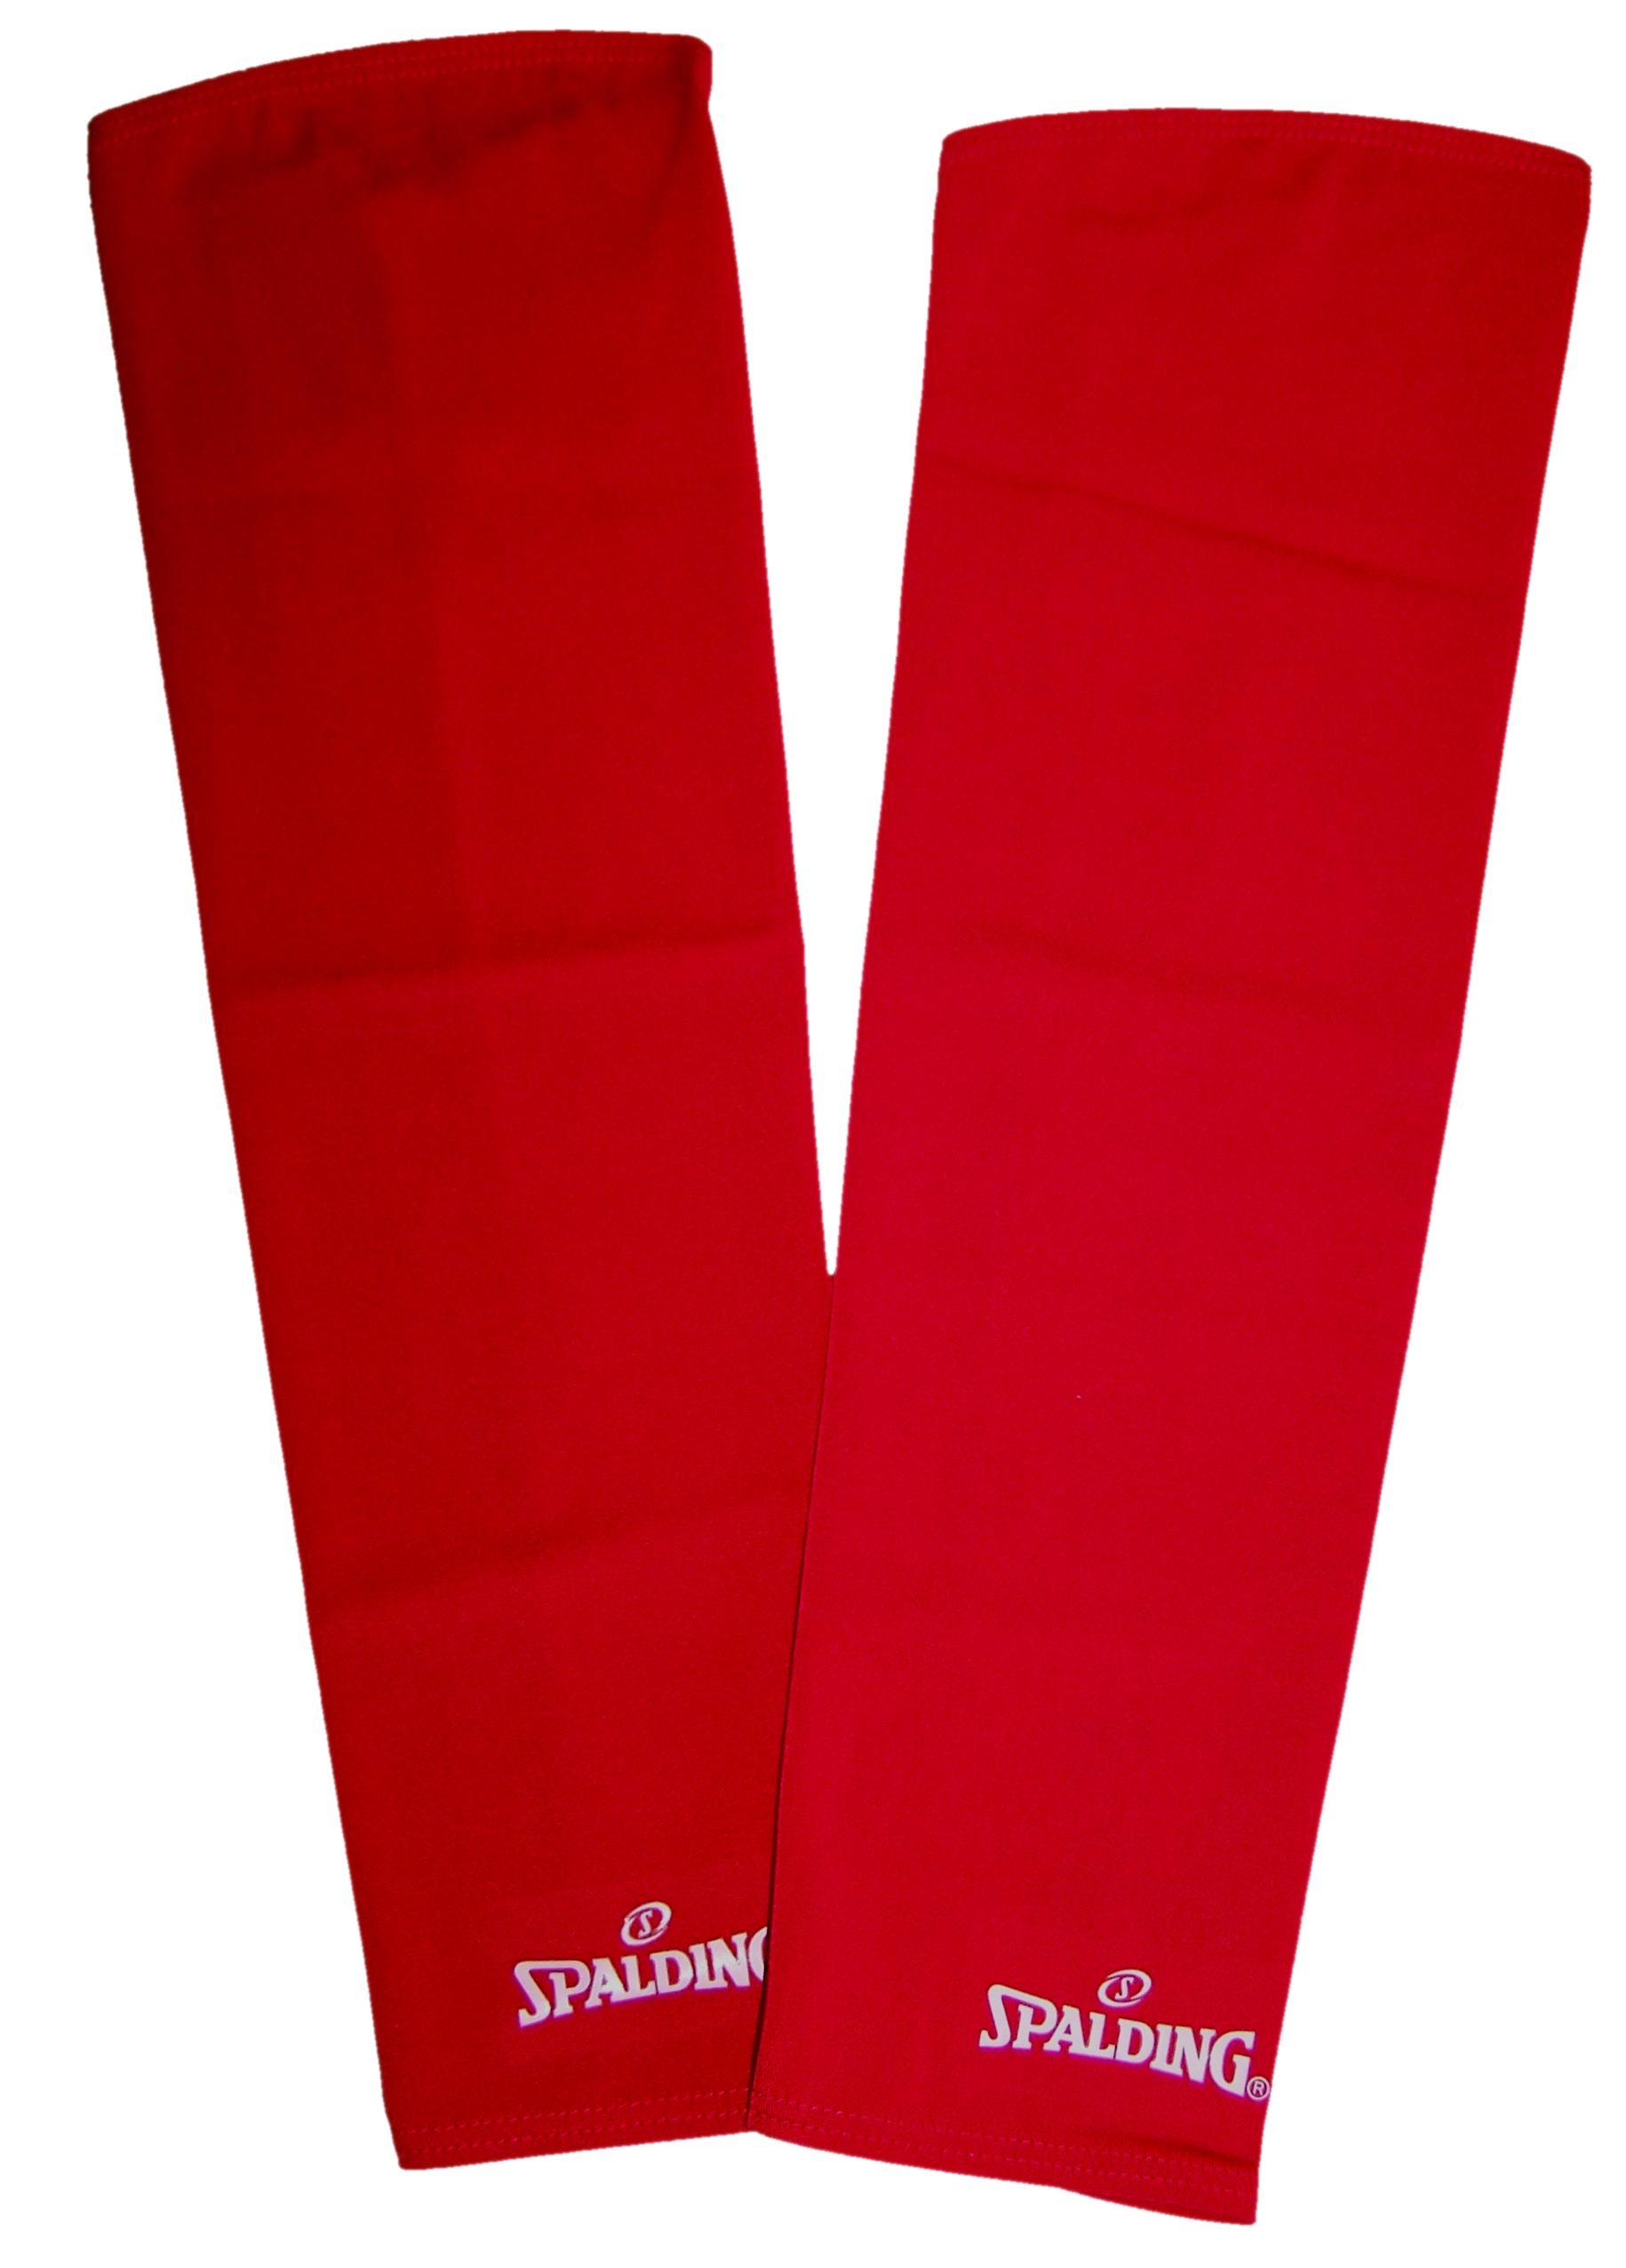 Spalding Shooting Compression Sleeves (Pack of two) - Red-L SP-3009284-03